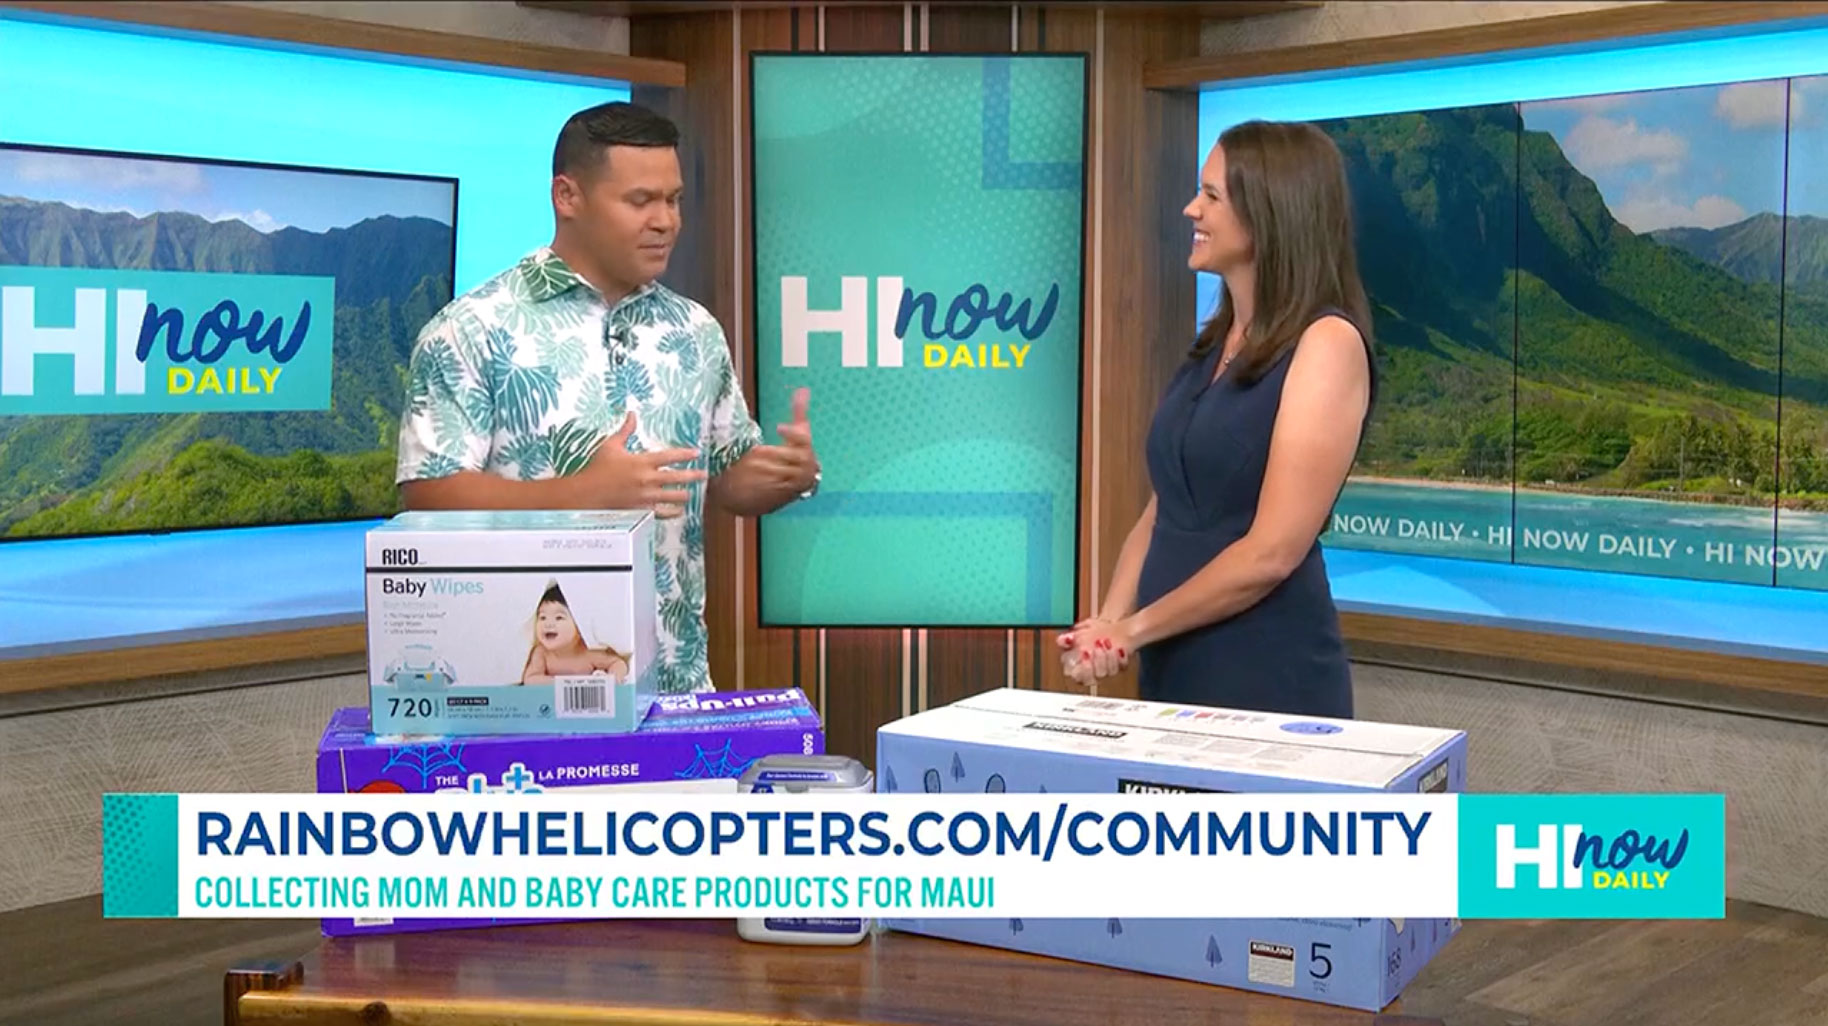 Nicole Battjes, founder of Rainbow Helicopters interviewed on HINOW television station about Maui fire relief efforts